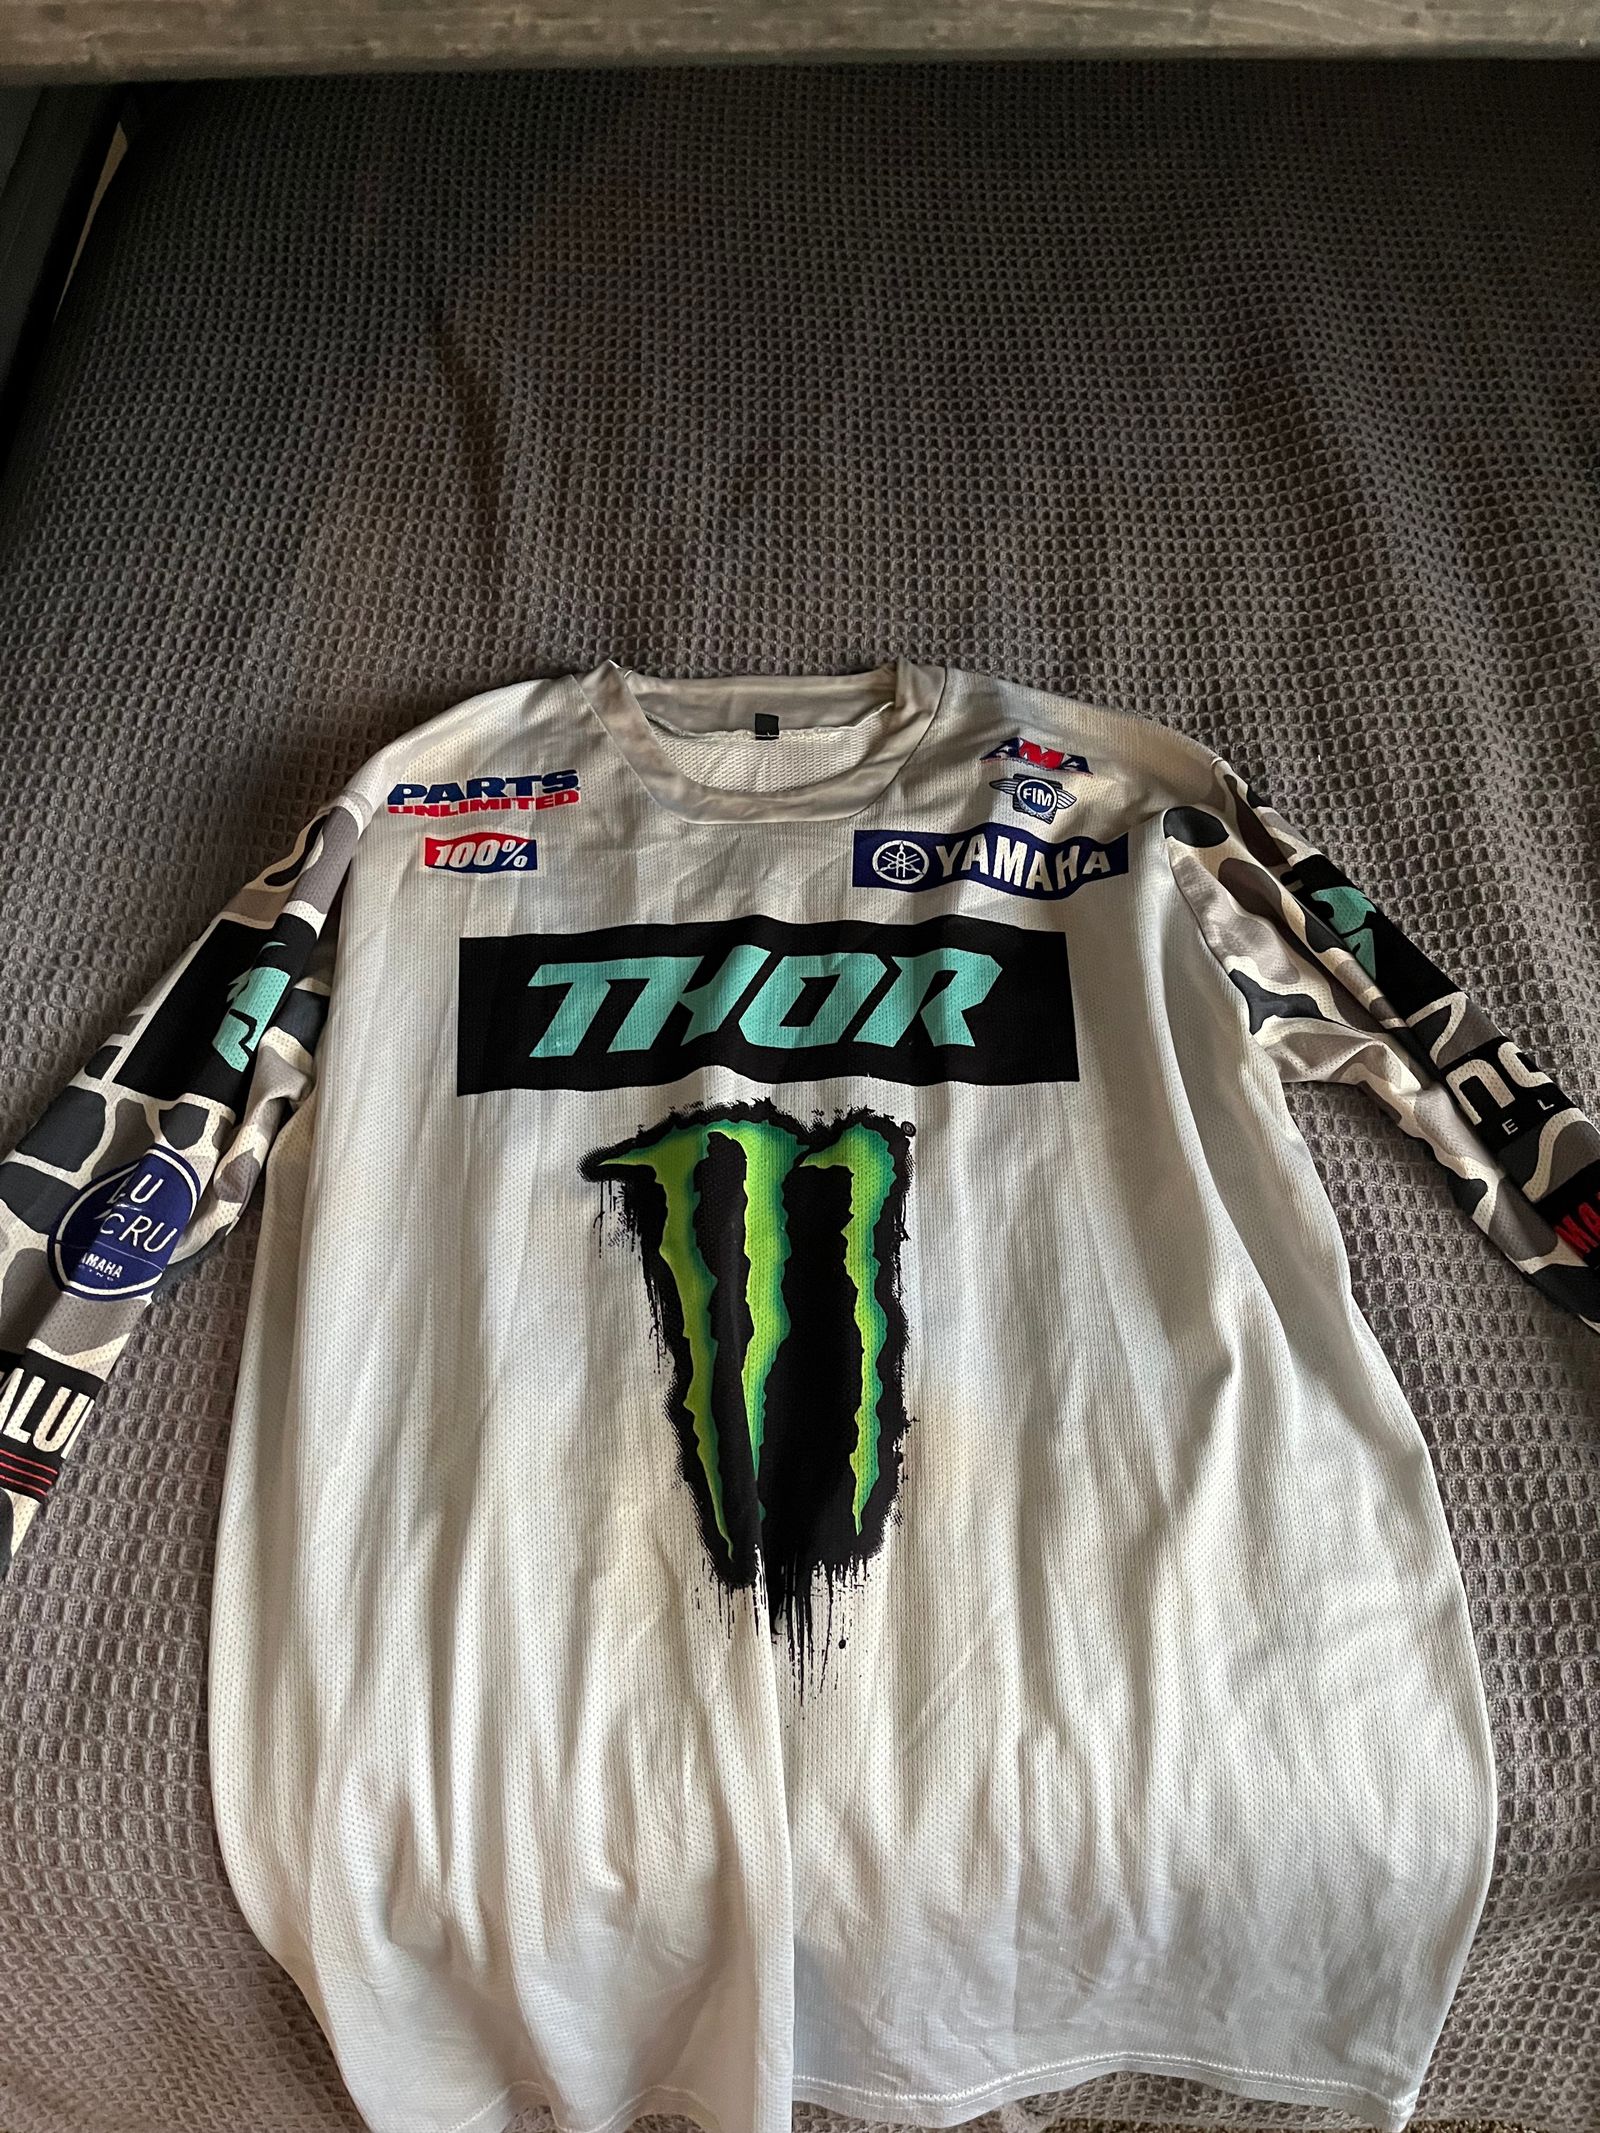 Aaron Plessinger Signed Jersey